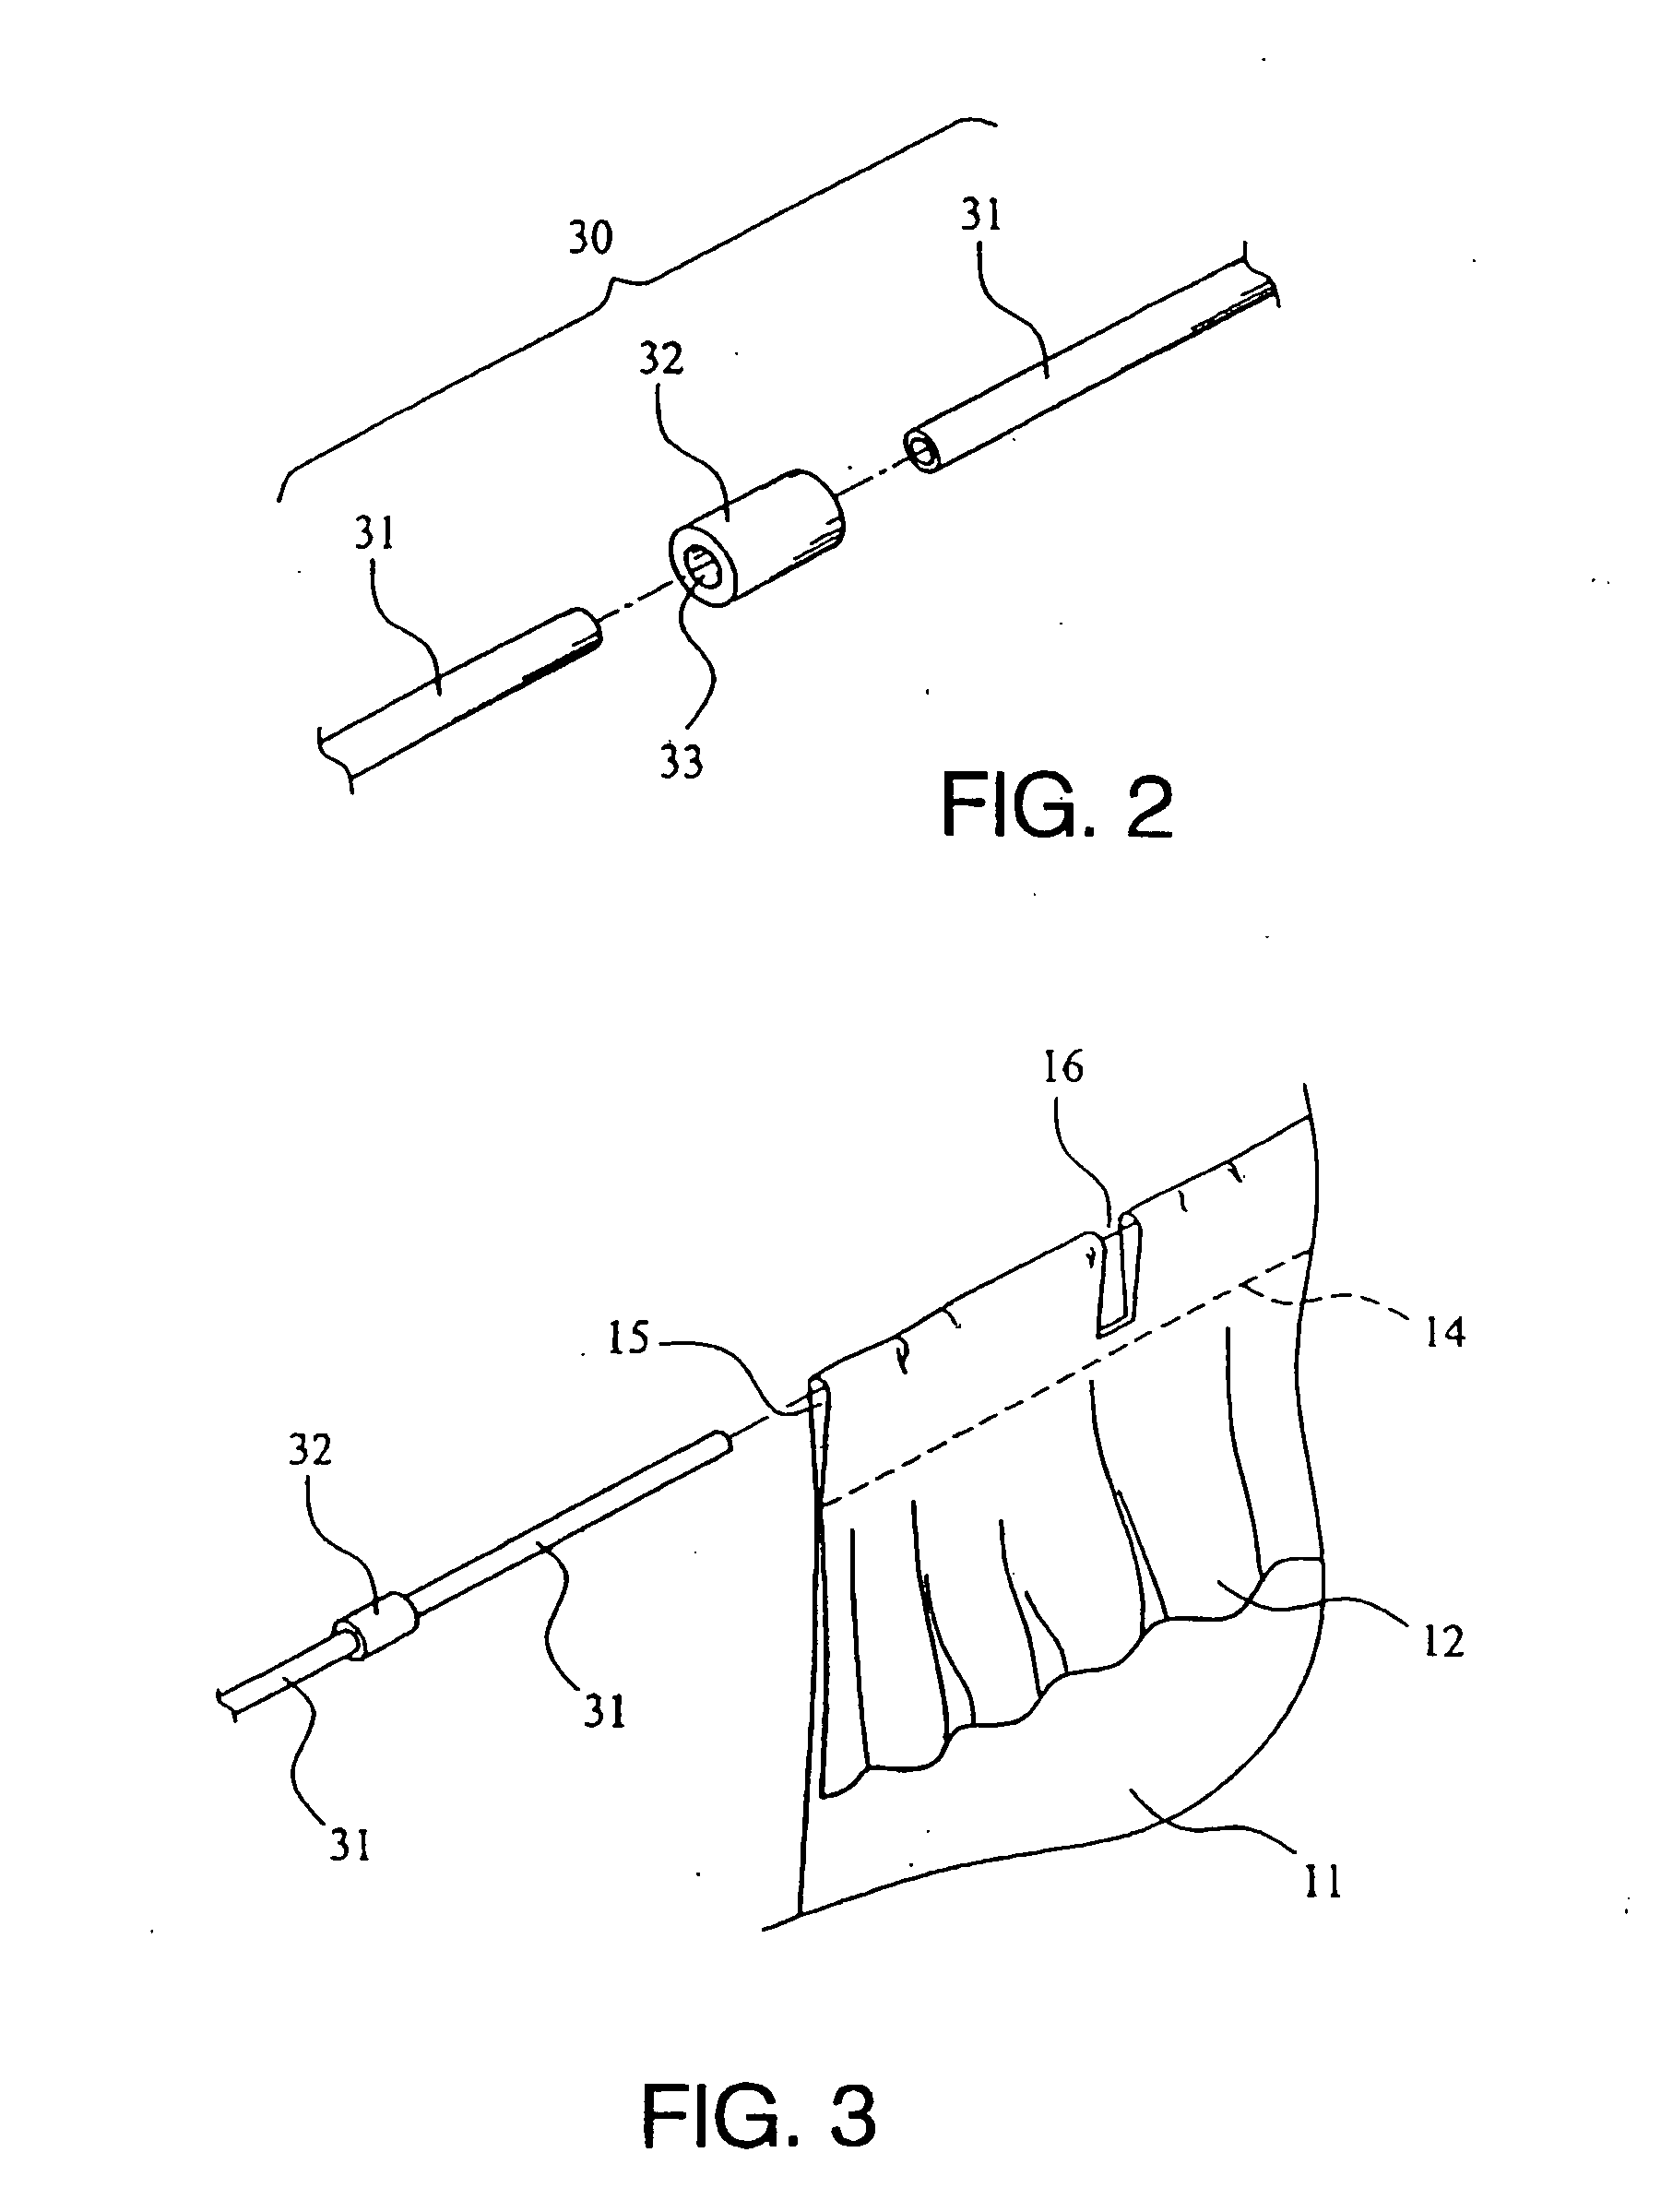 Mosquito net supporting frame structure and mosquito net arrangement